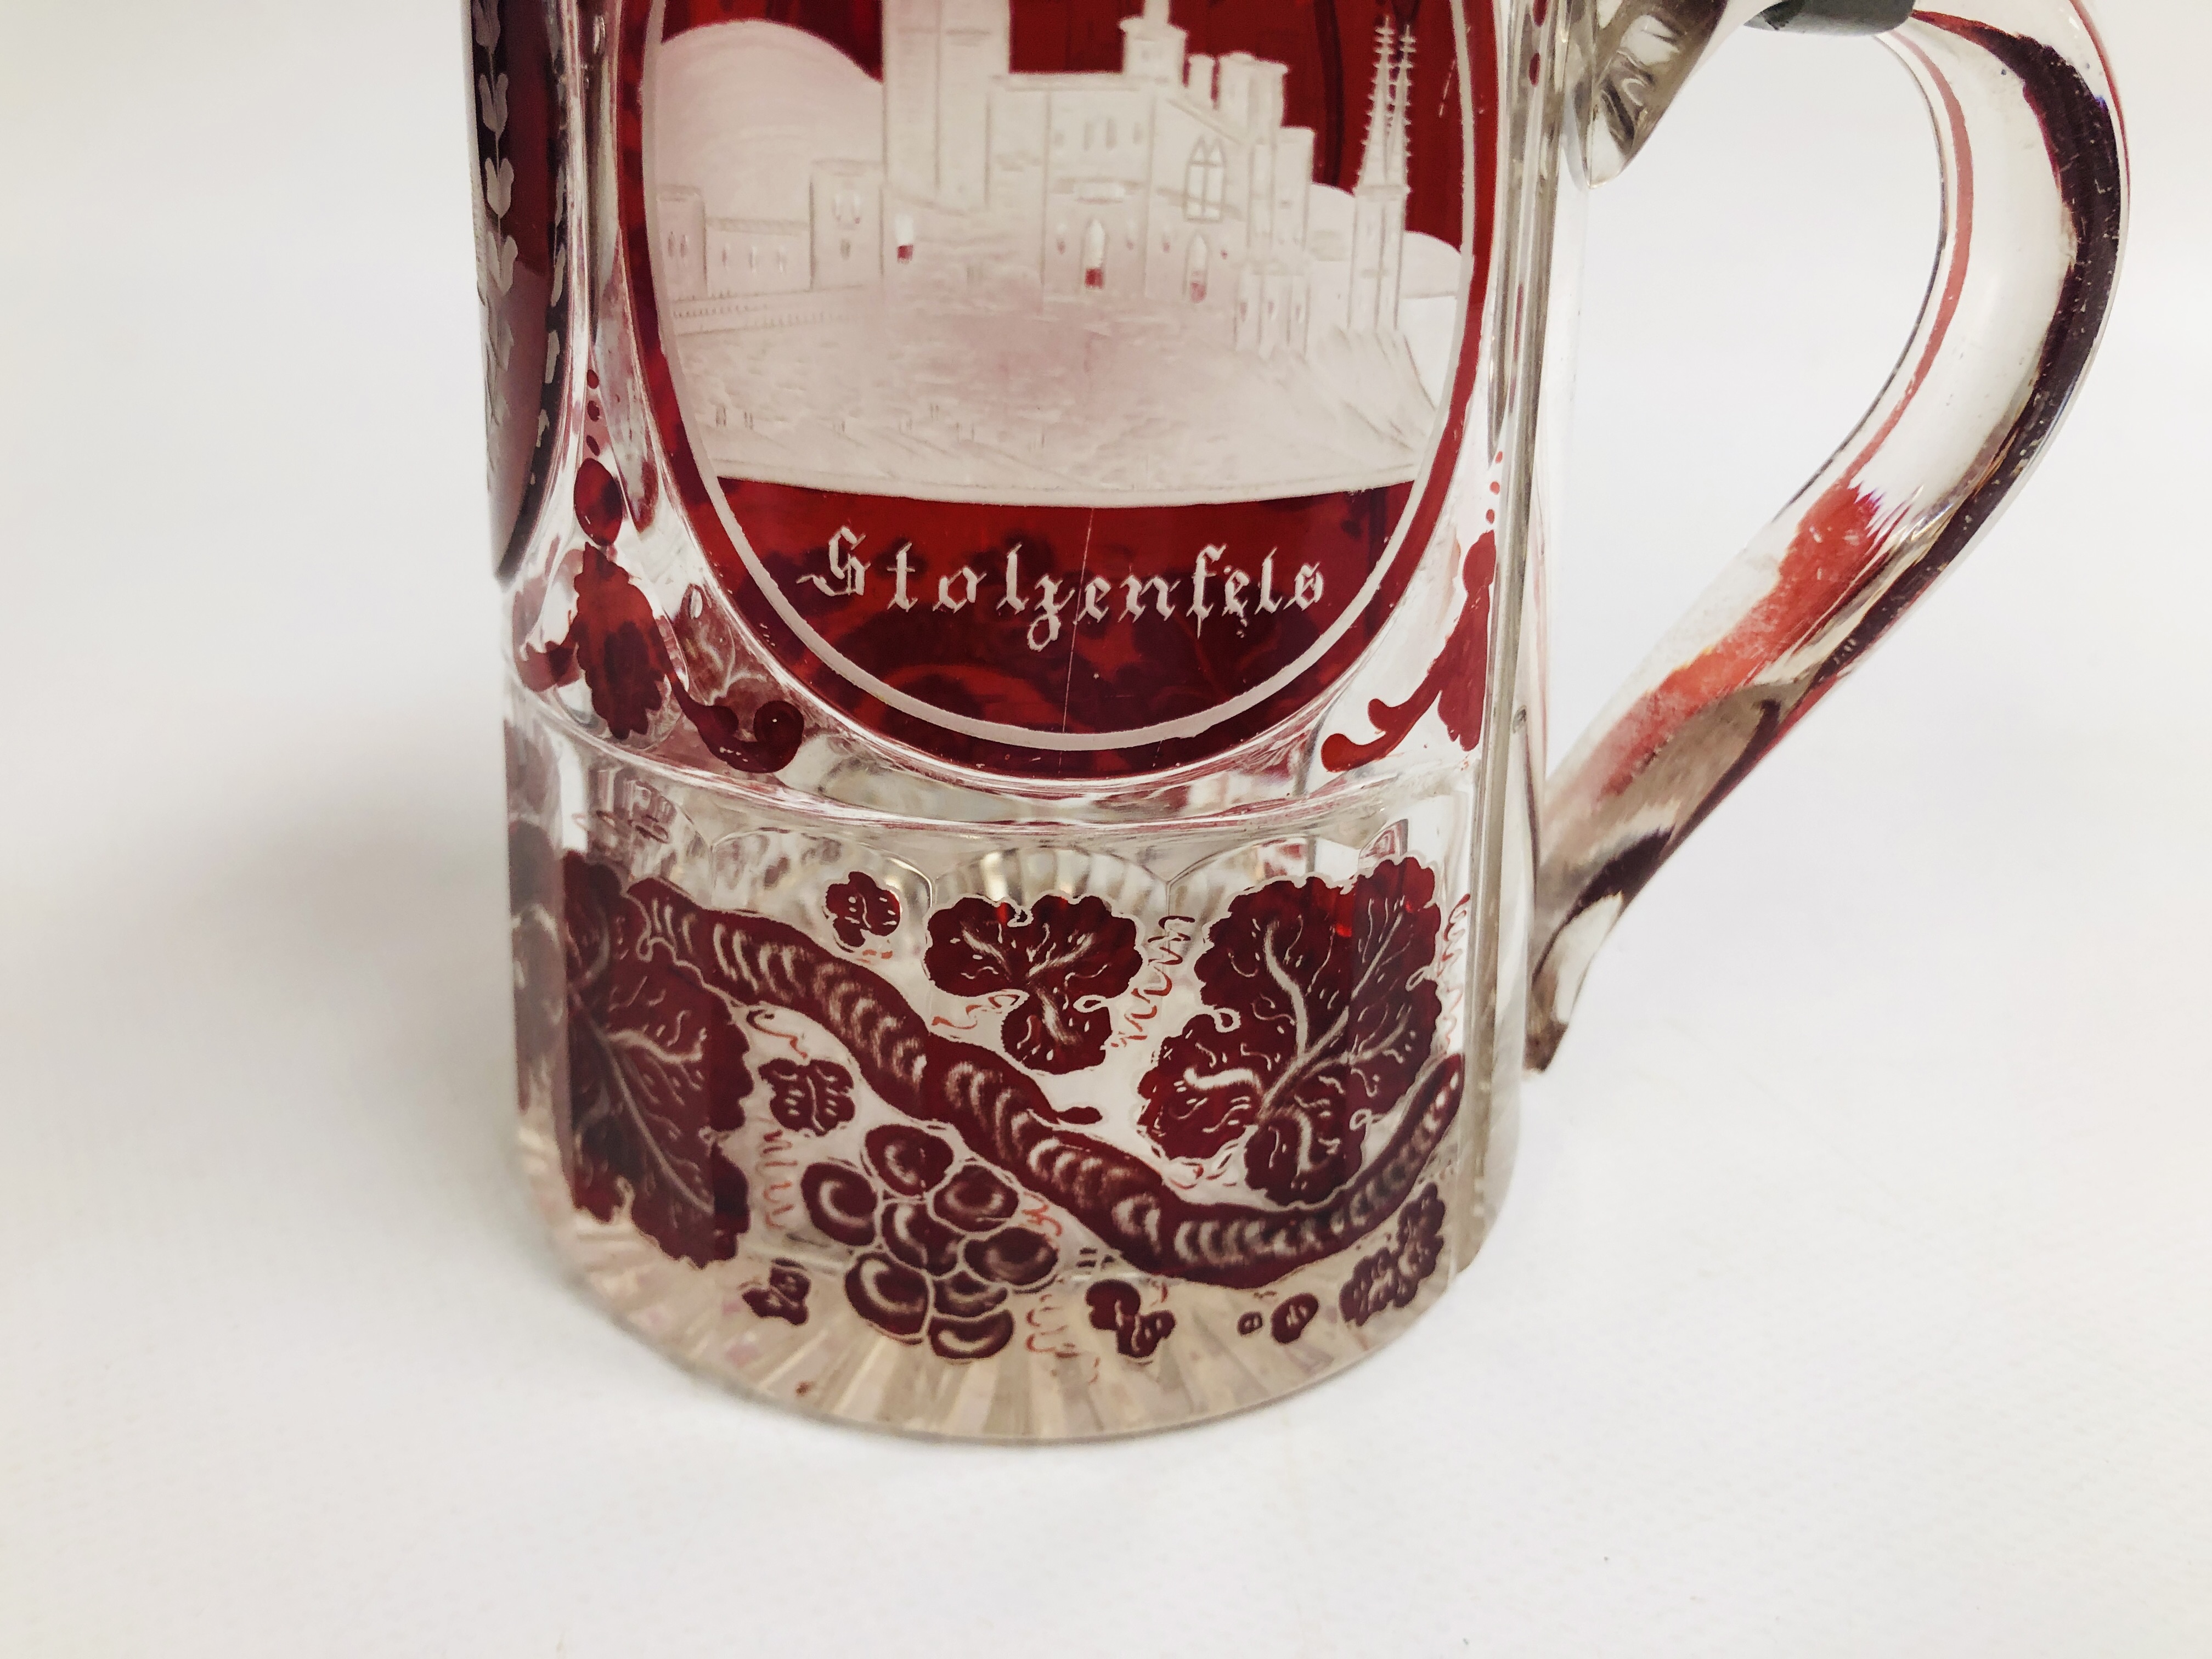 VINTAGE GLASS STEIN WITH ETCHED GLASS DETAIL - Image 3 of 8